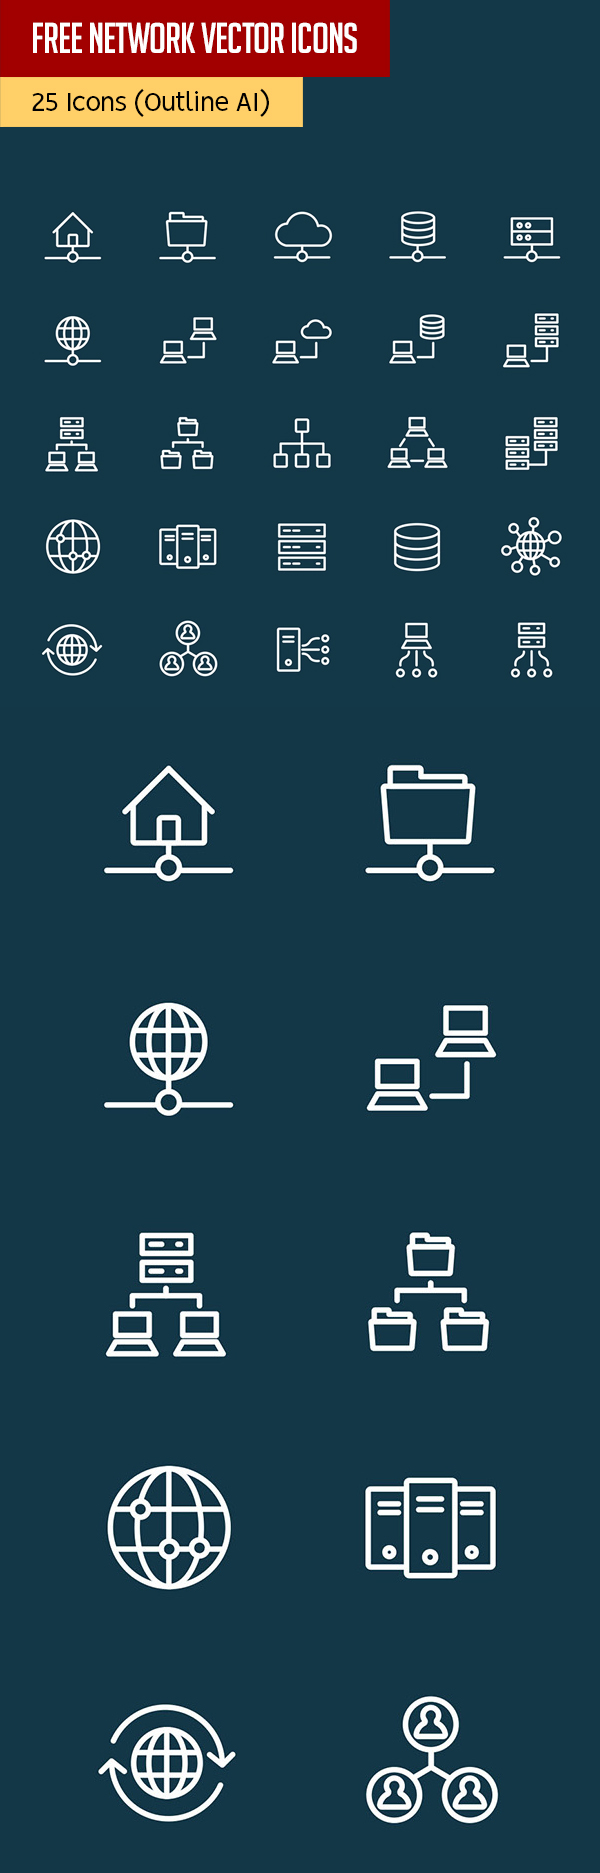 Free Vector Network Icons